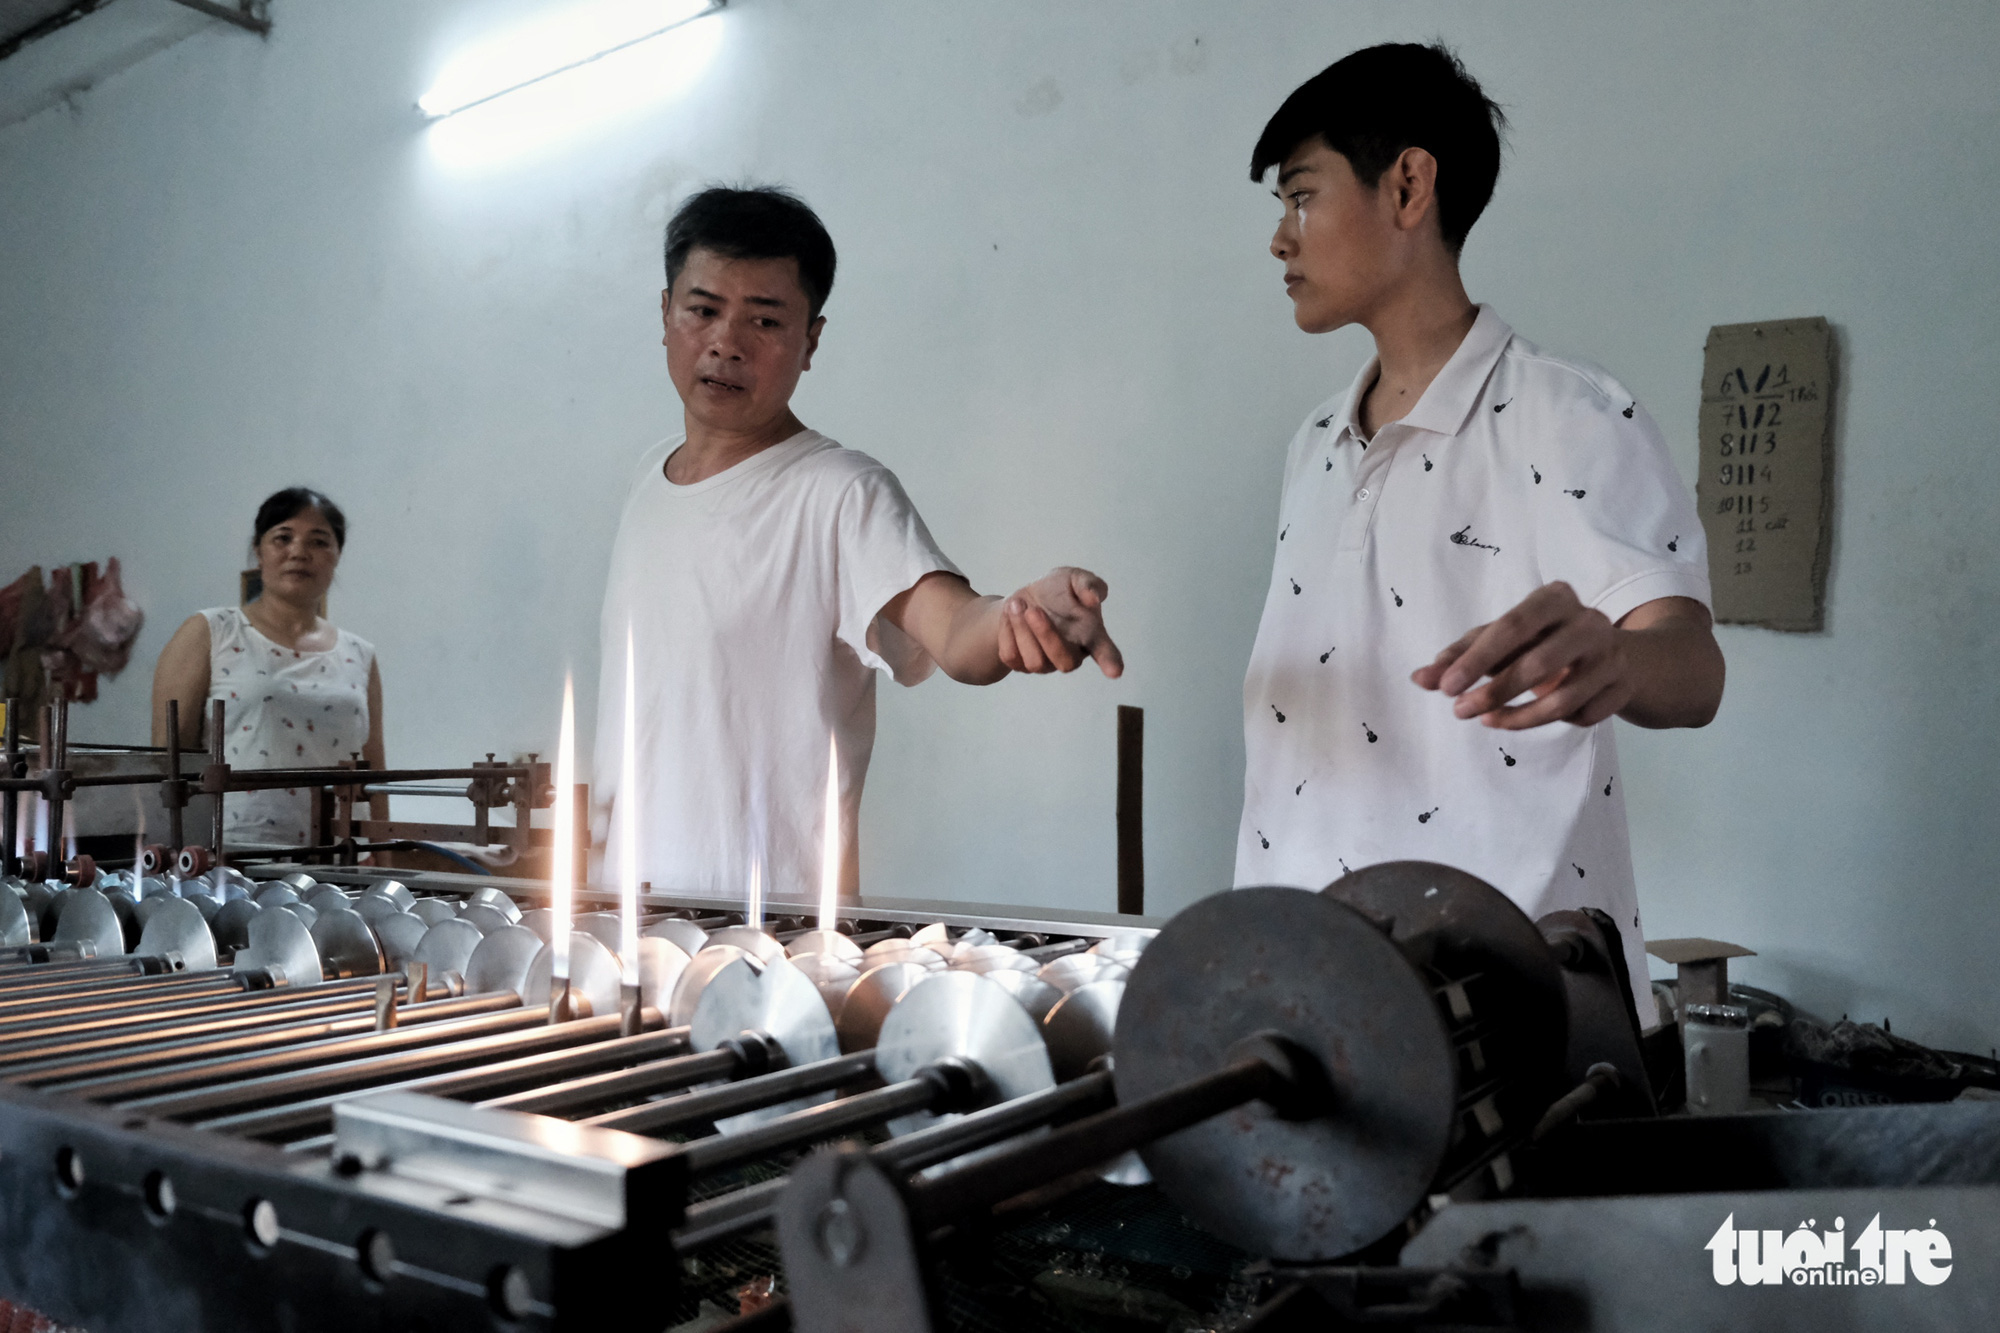 Ta Thi Nga (left), her husband Luong Van Trai (center) and their son are seen operating a machine which churns out test tubes. Photo: Mai Thuong / Tuoi Tre